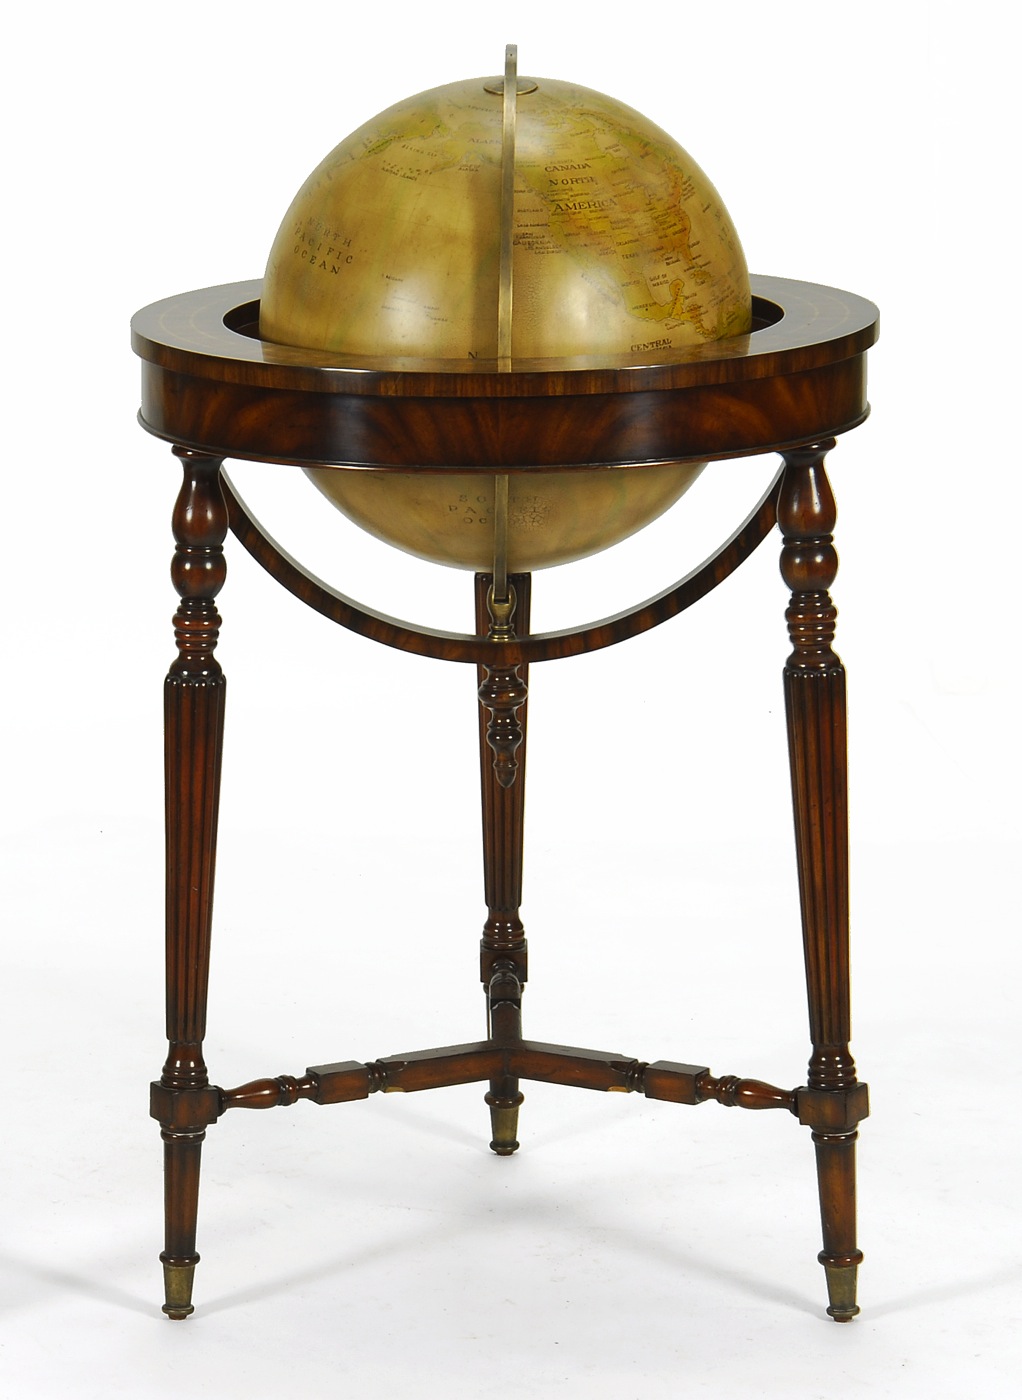 ANTIQUE-STYLE LIBRARY GLOBE ON